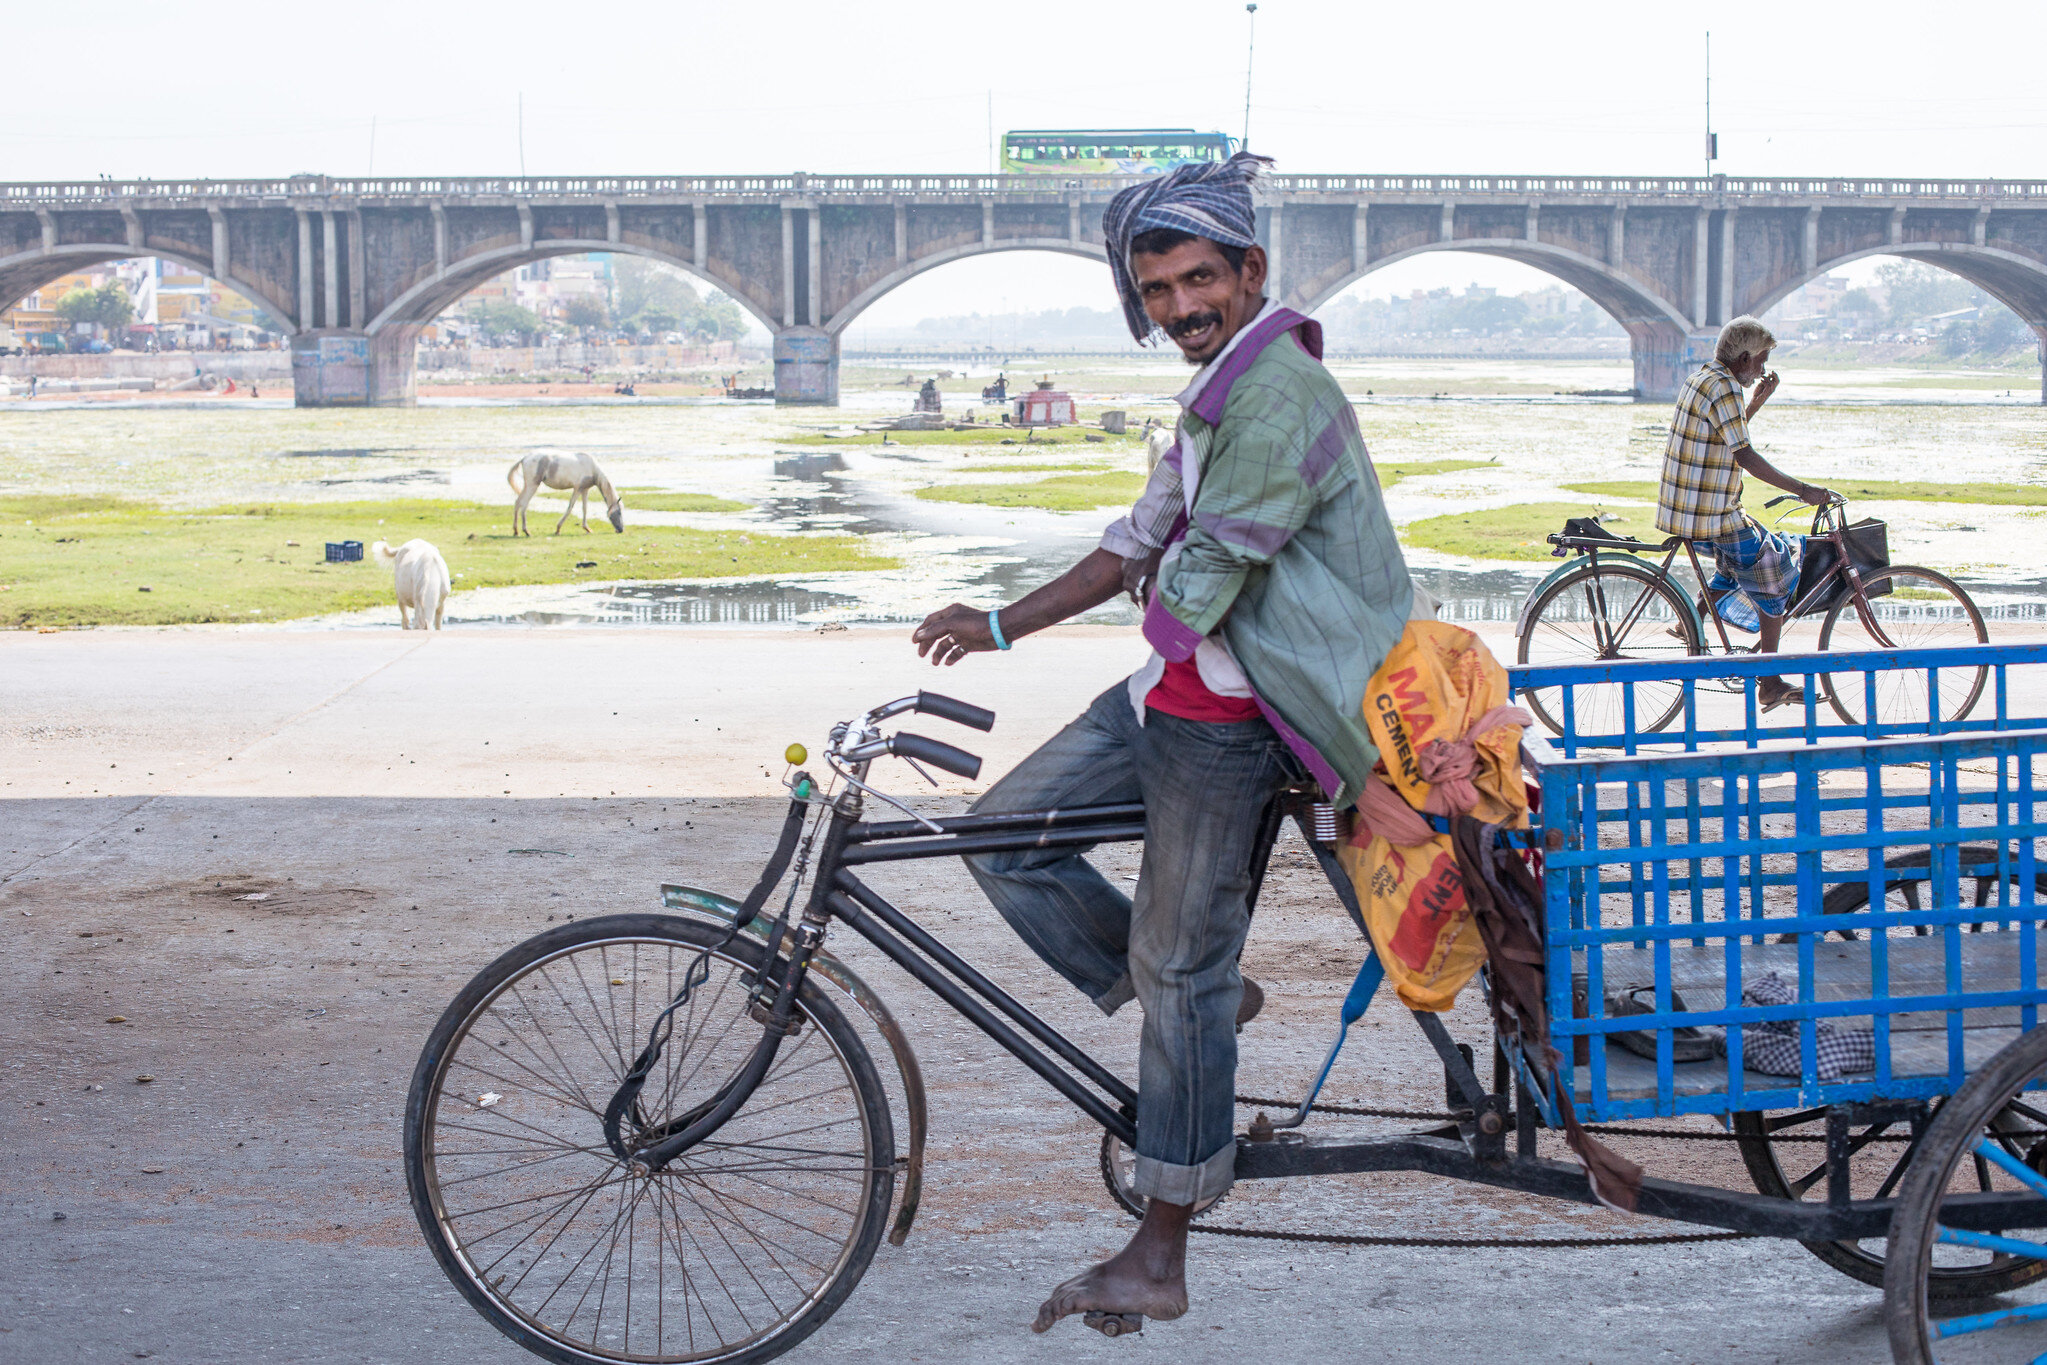 Two cyclists cross each other on a bridge across a river in Madurai, India.